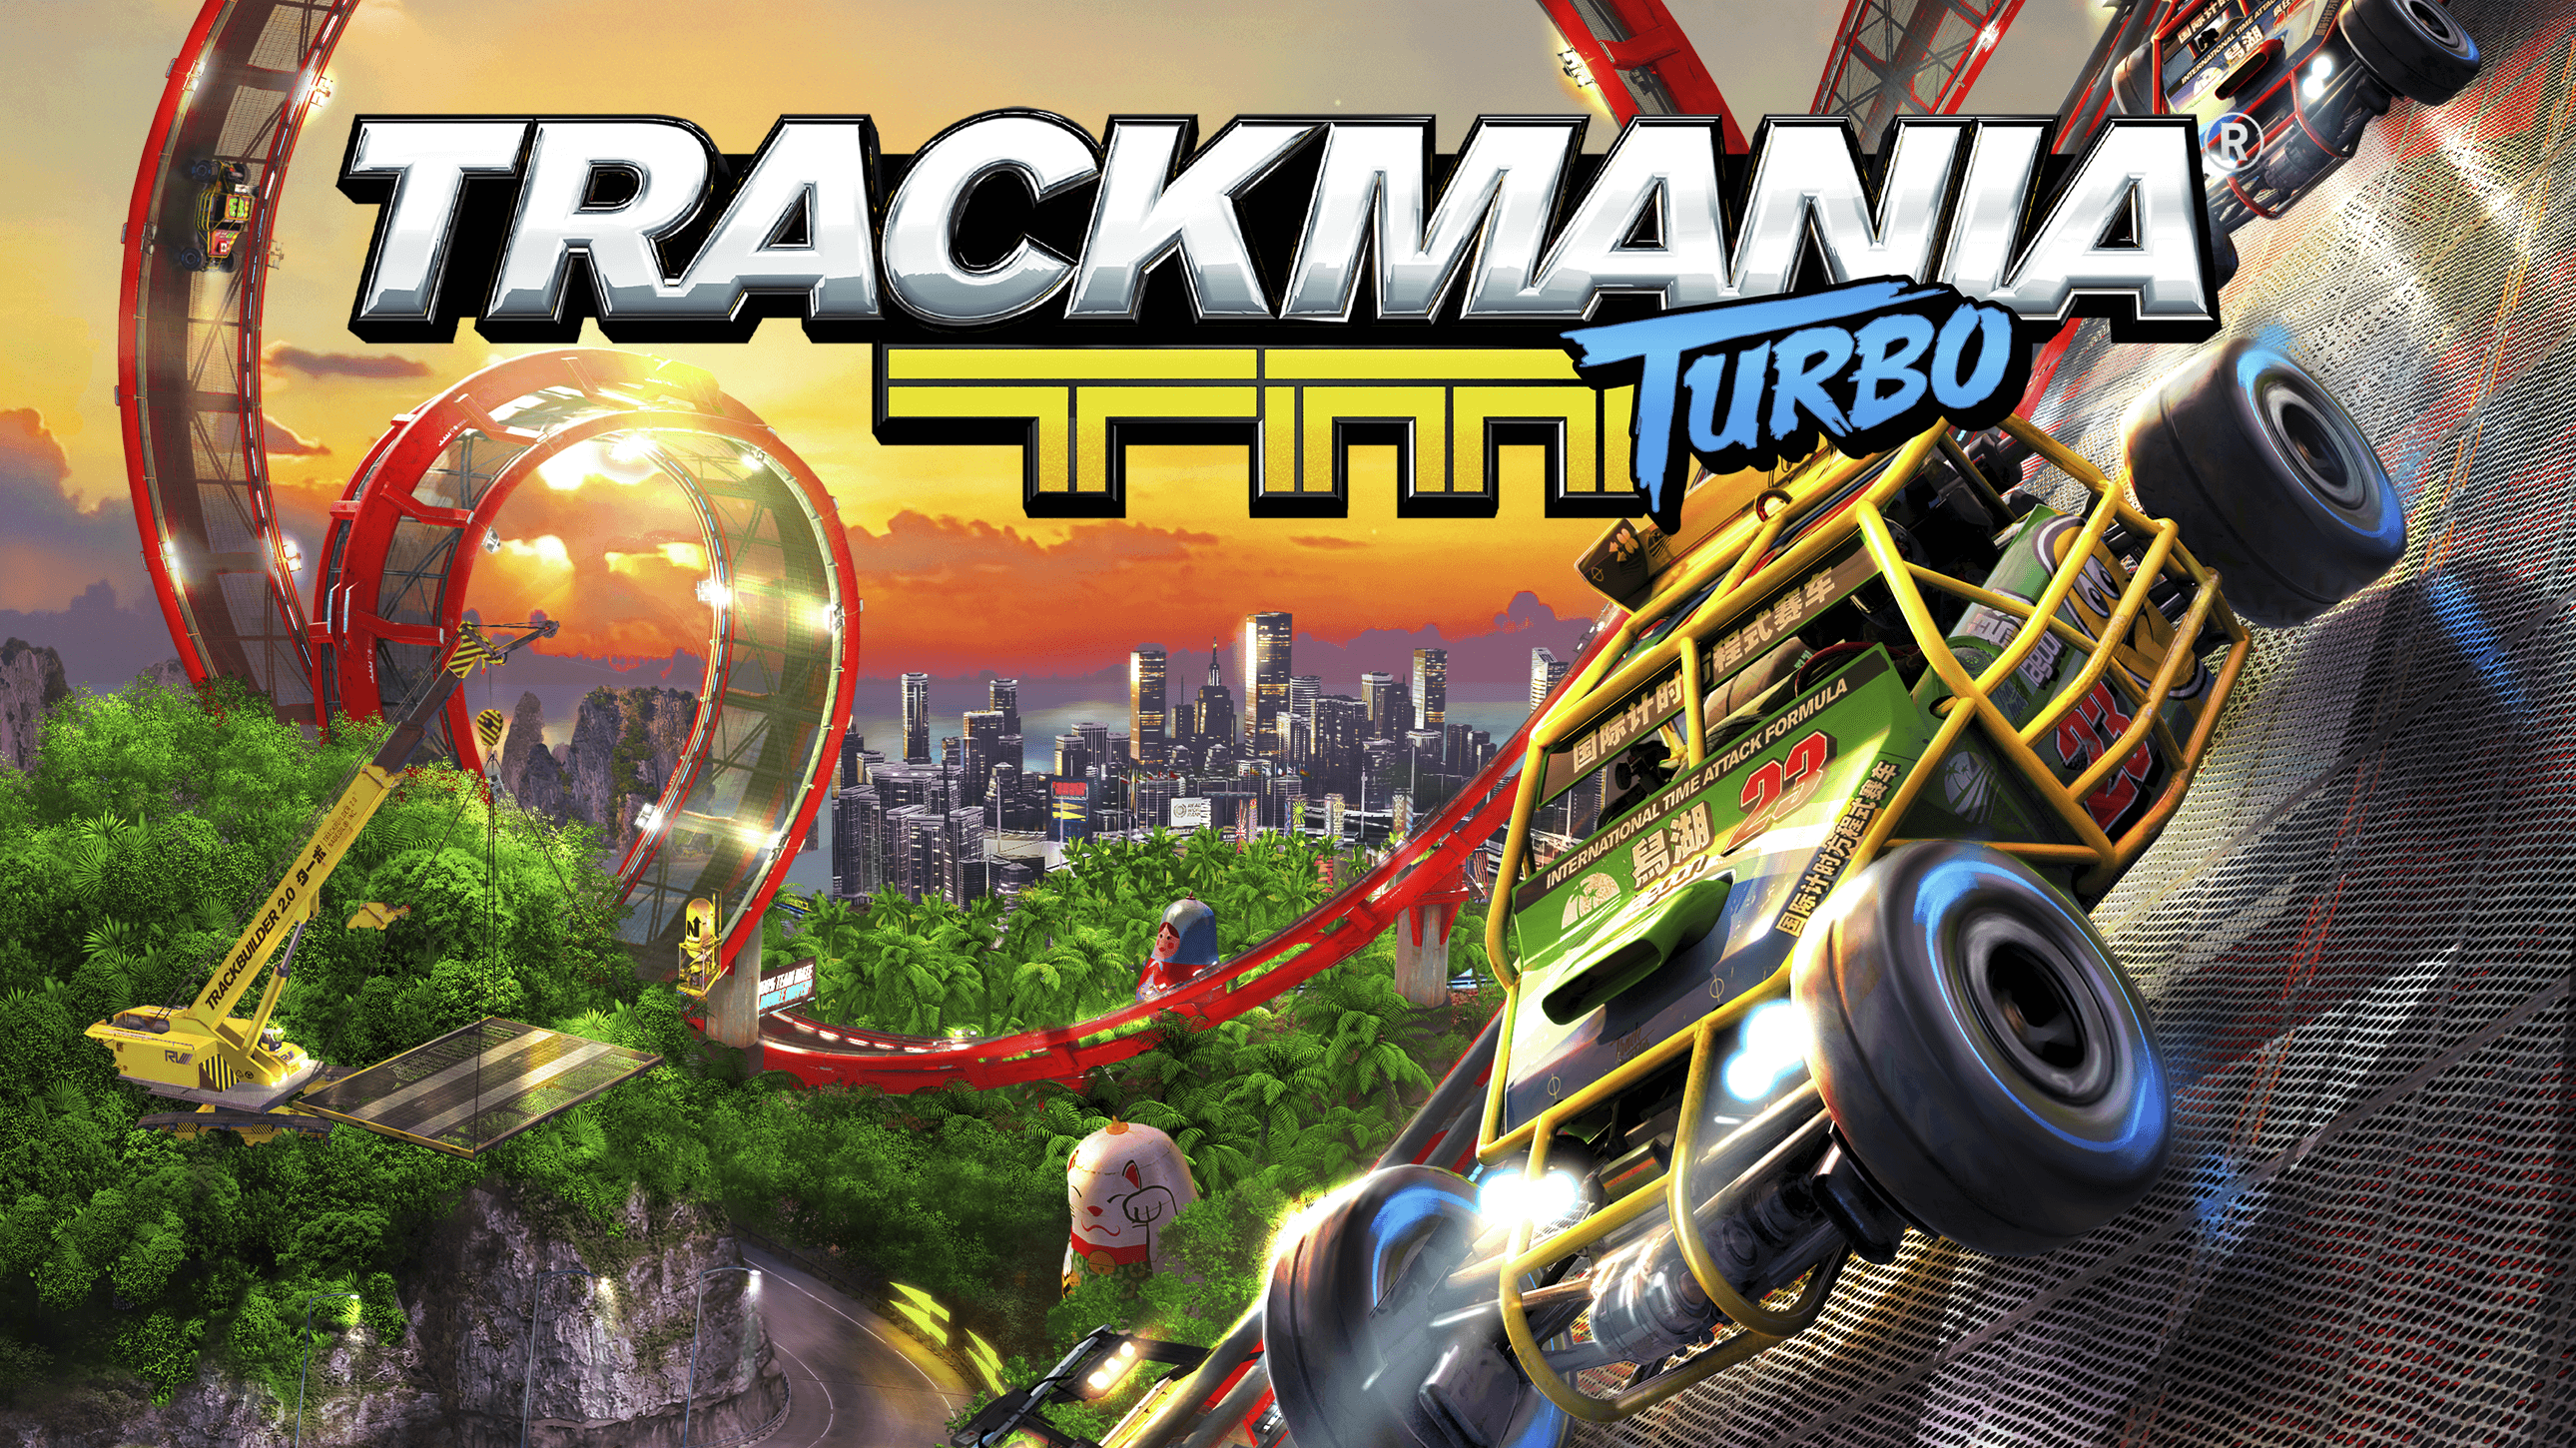 Trackmania Turbo Mobile Game Full Version Download